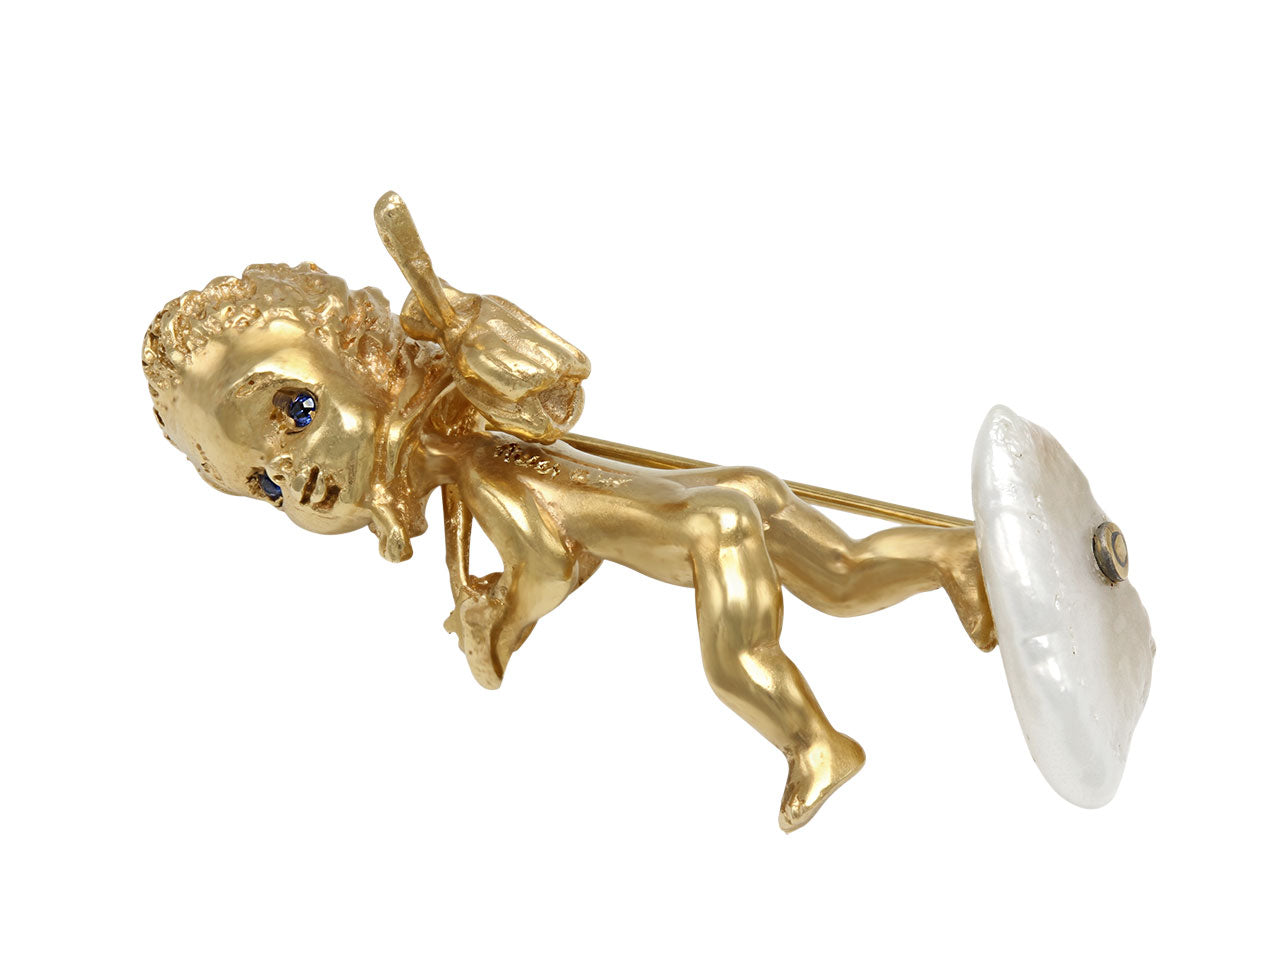 Ruser American Freshwater Pearl 'Thursday's Child' Brooch in 14K Gold